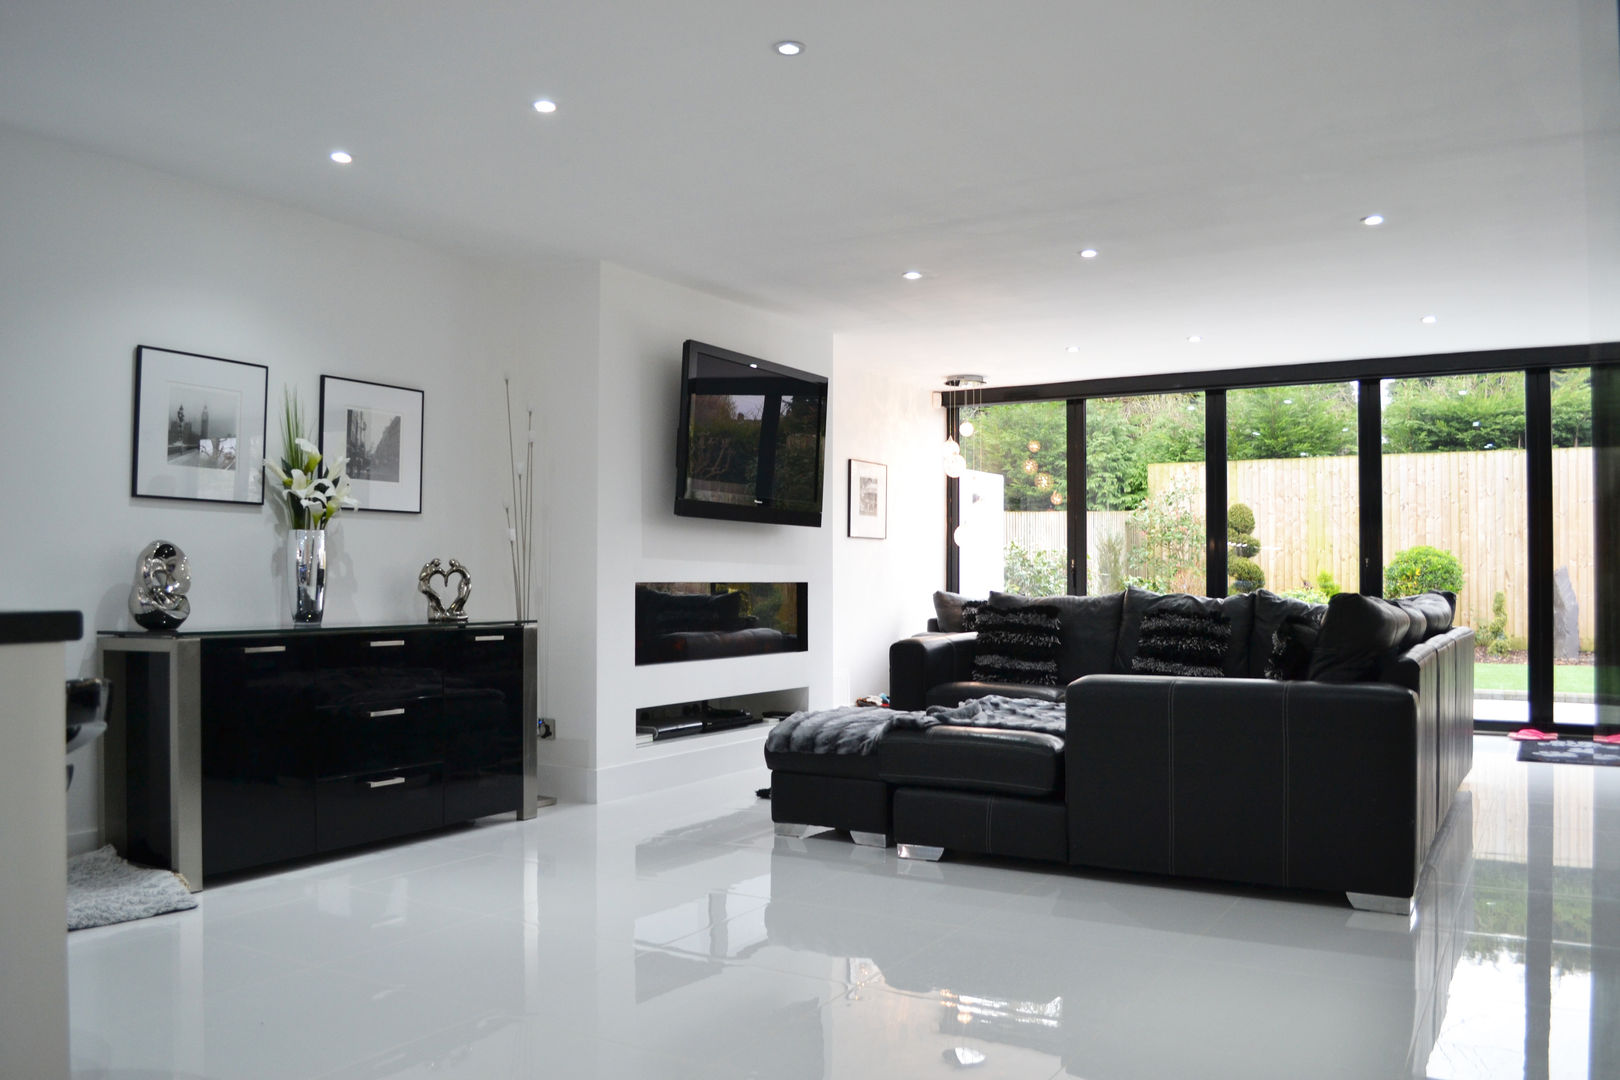 Main Living Room - As Built Arc 3 Architects & Chartered Surveyors Living room